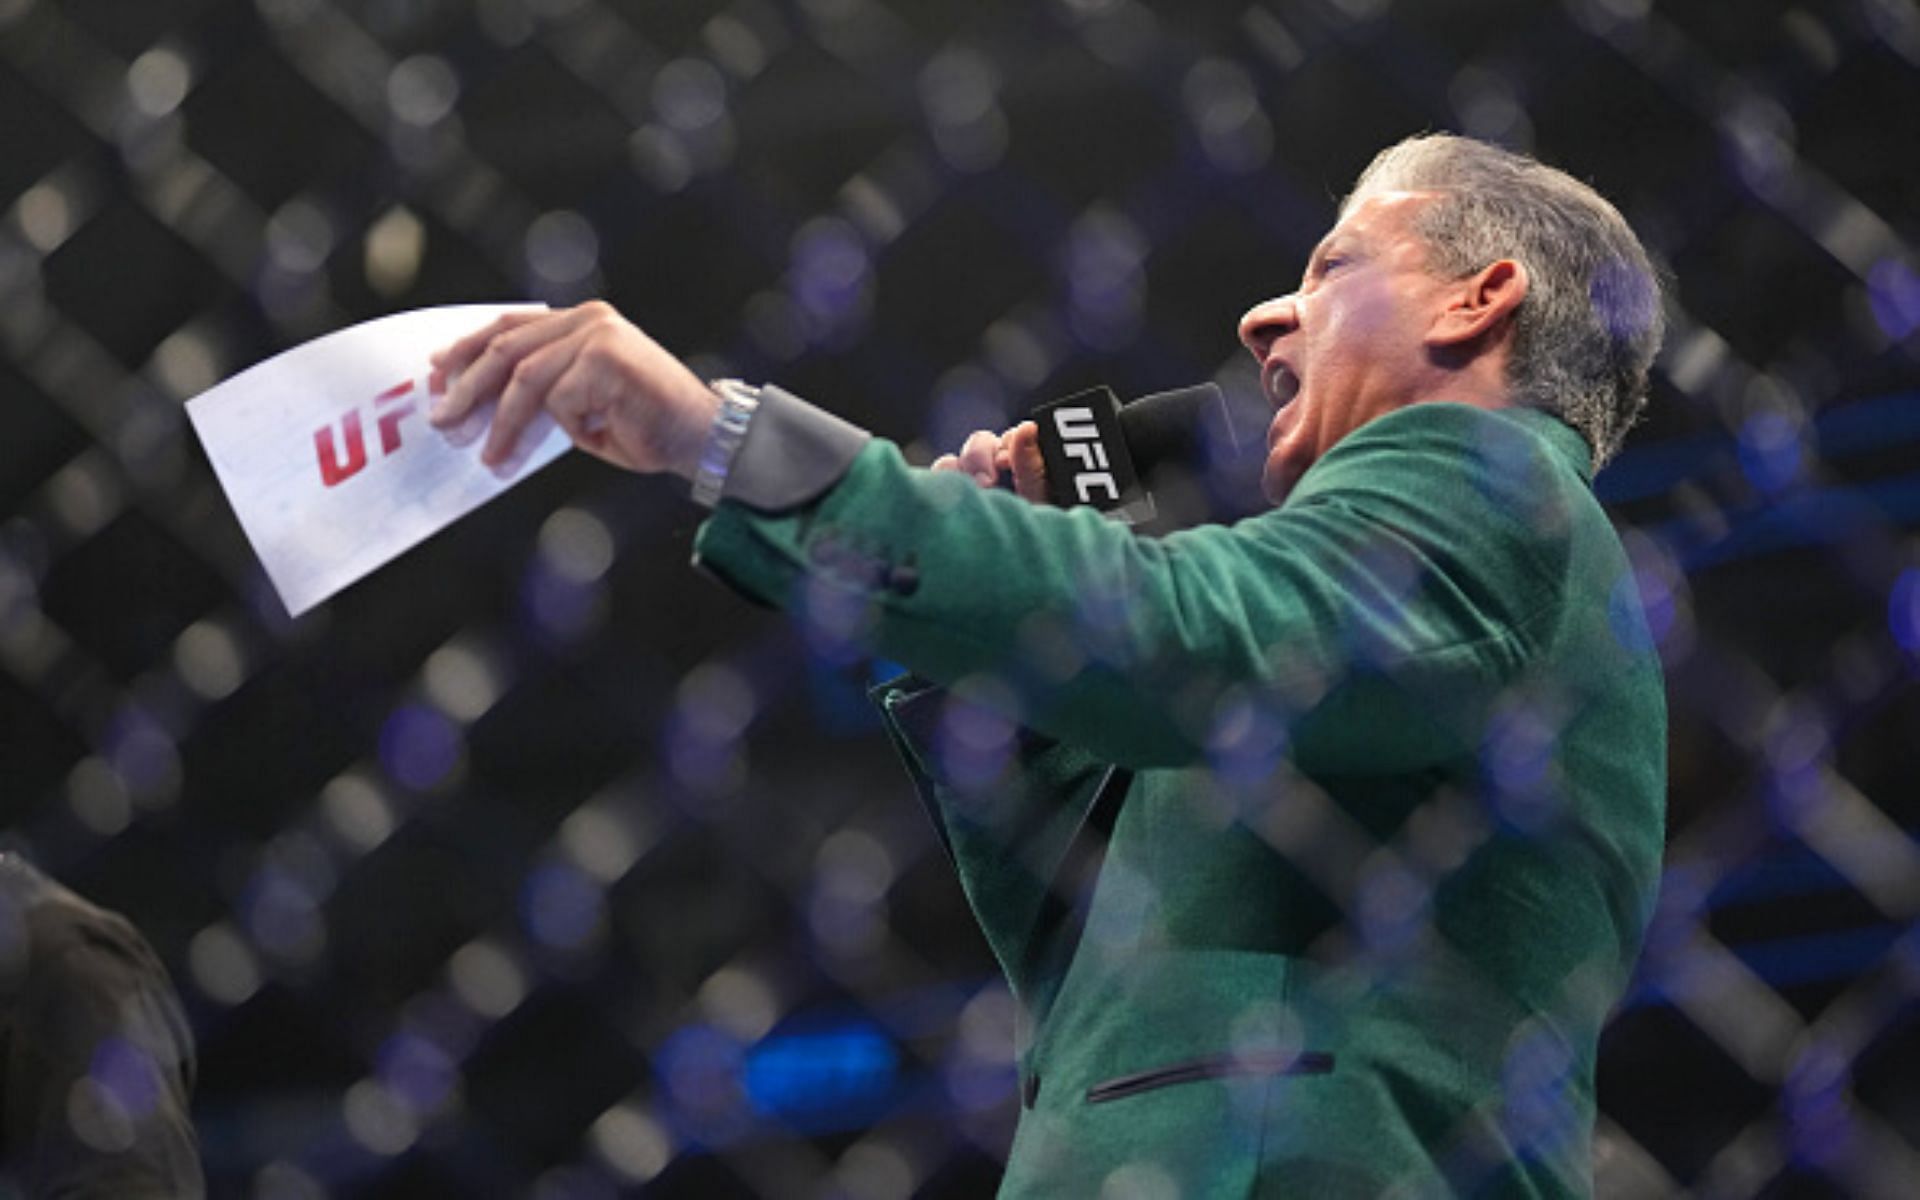 Bruce Buffer at a UFC event [Image courtesy: Getty]